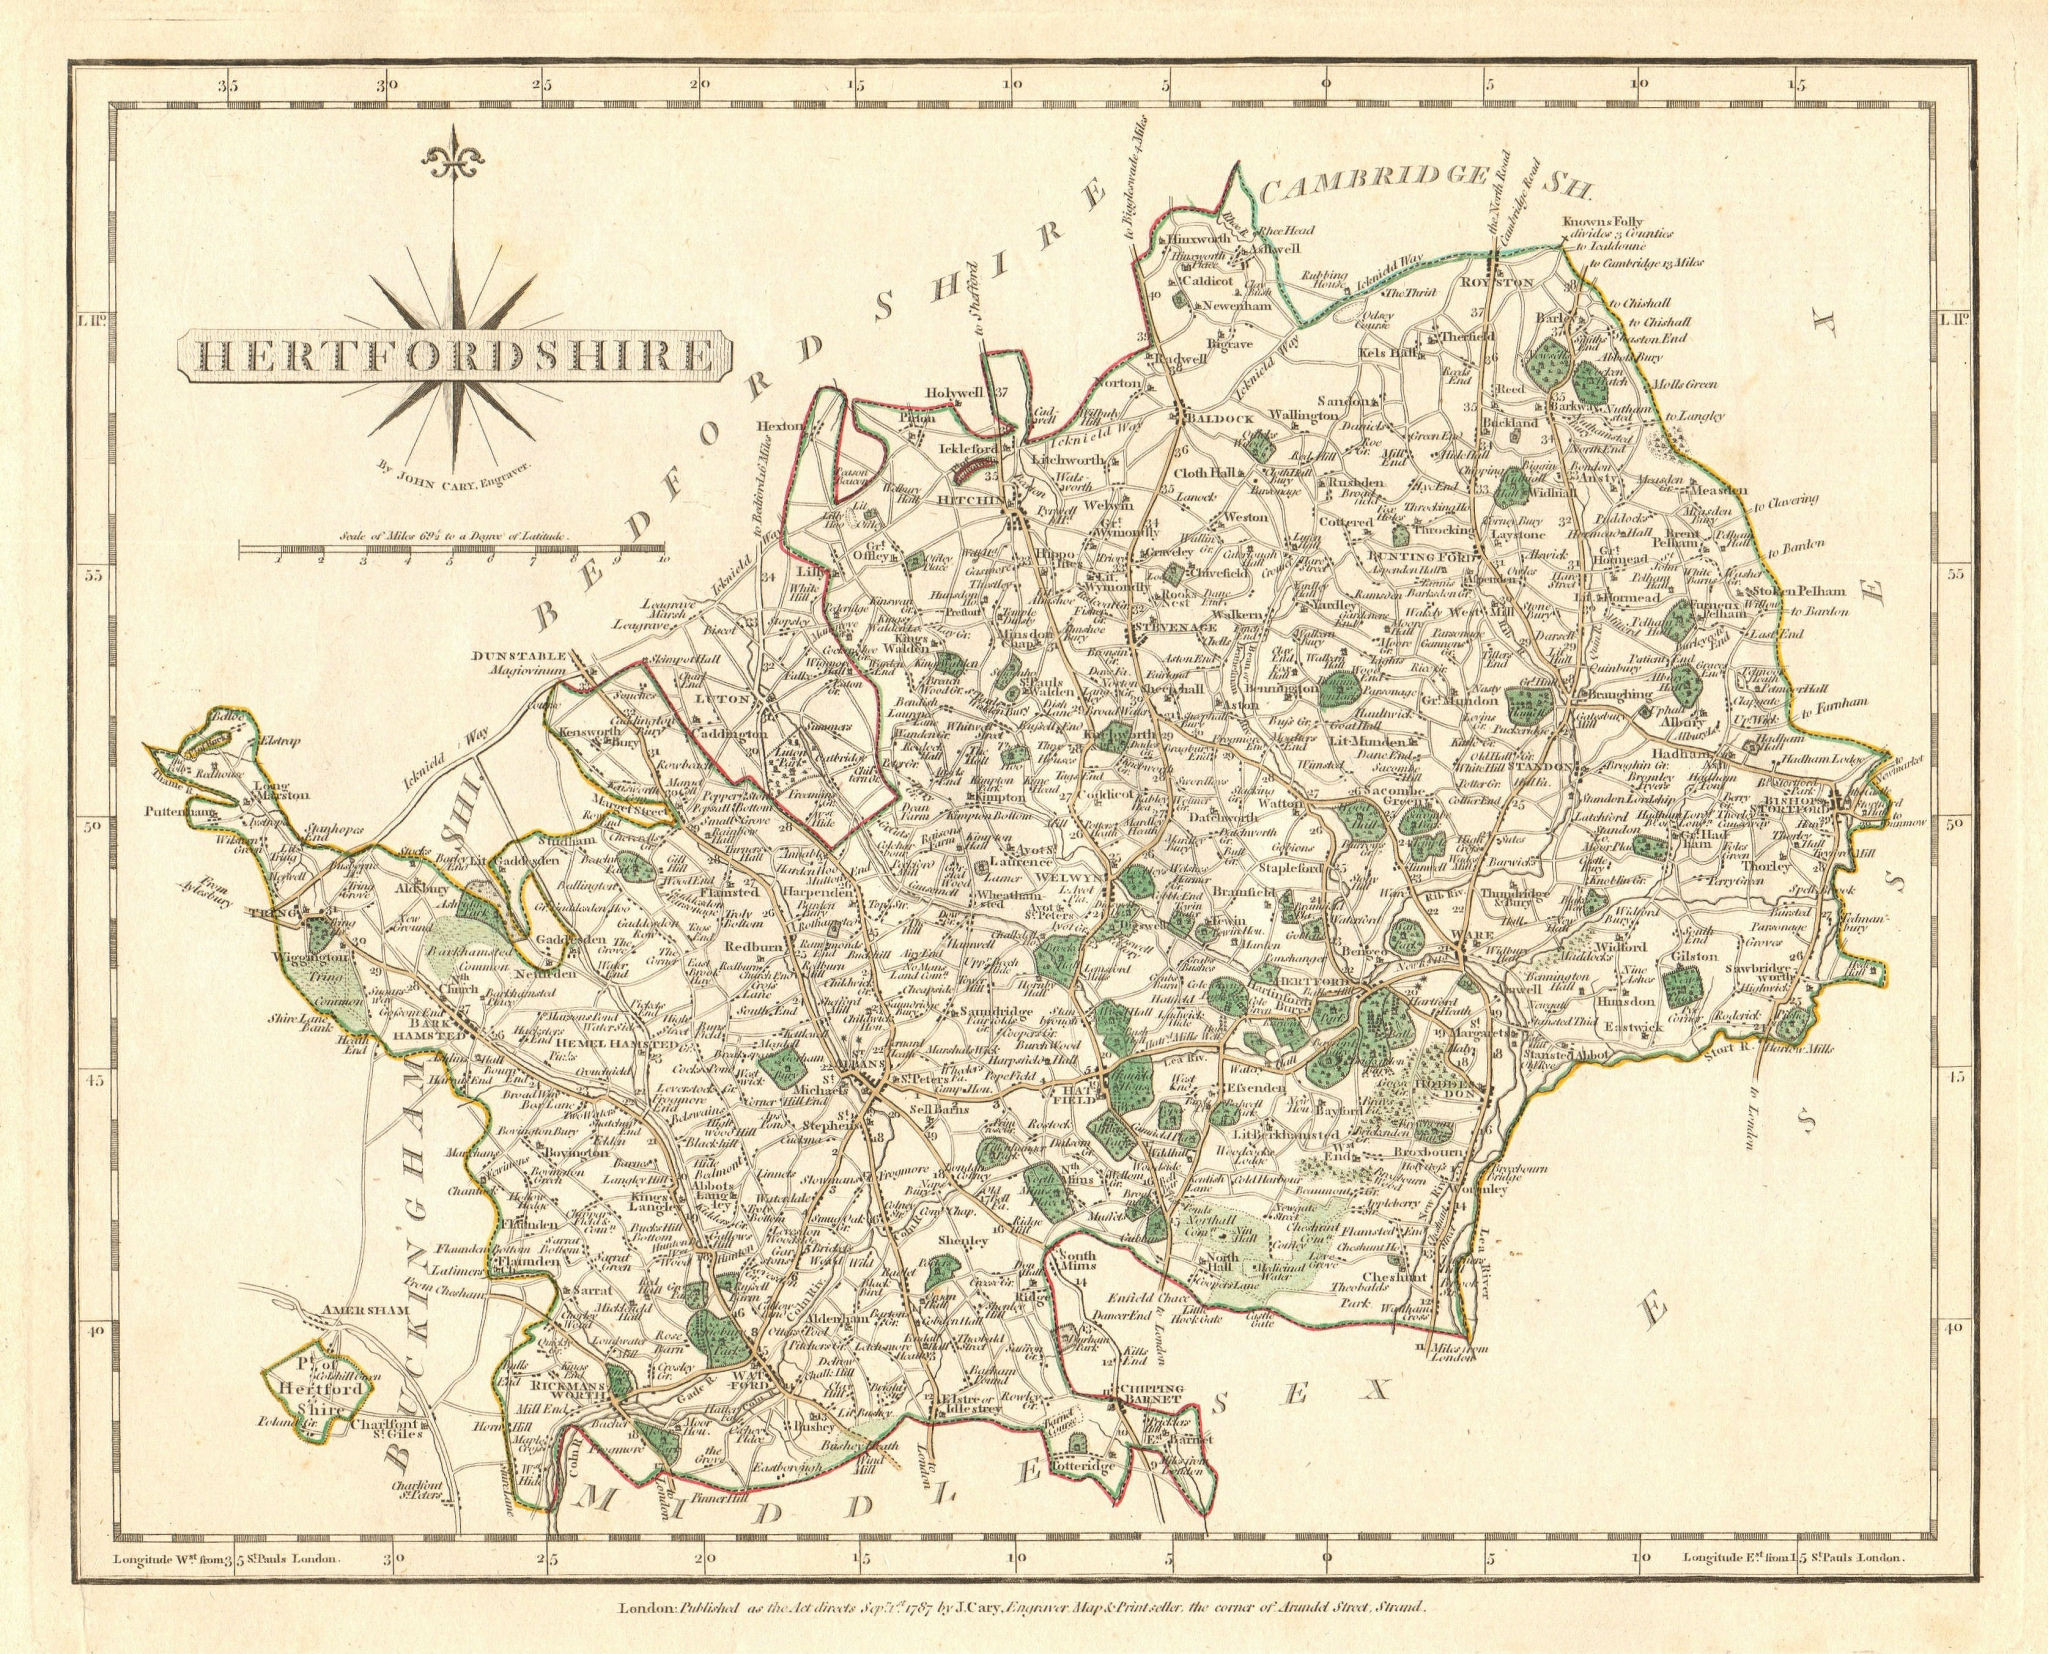 Associate Product Antique county map of HERTFORDSHIRE by JOHN CARY. Original outline colour 1787